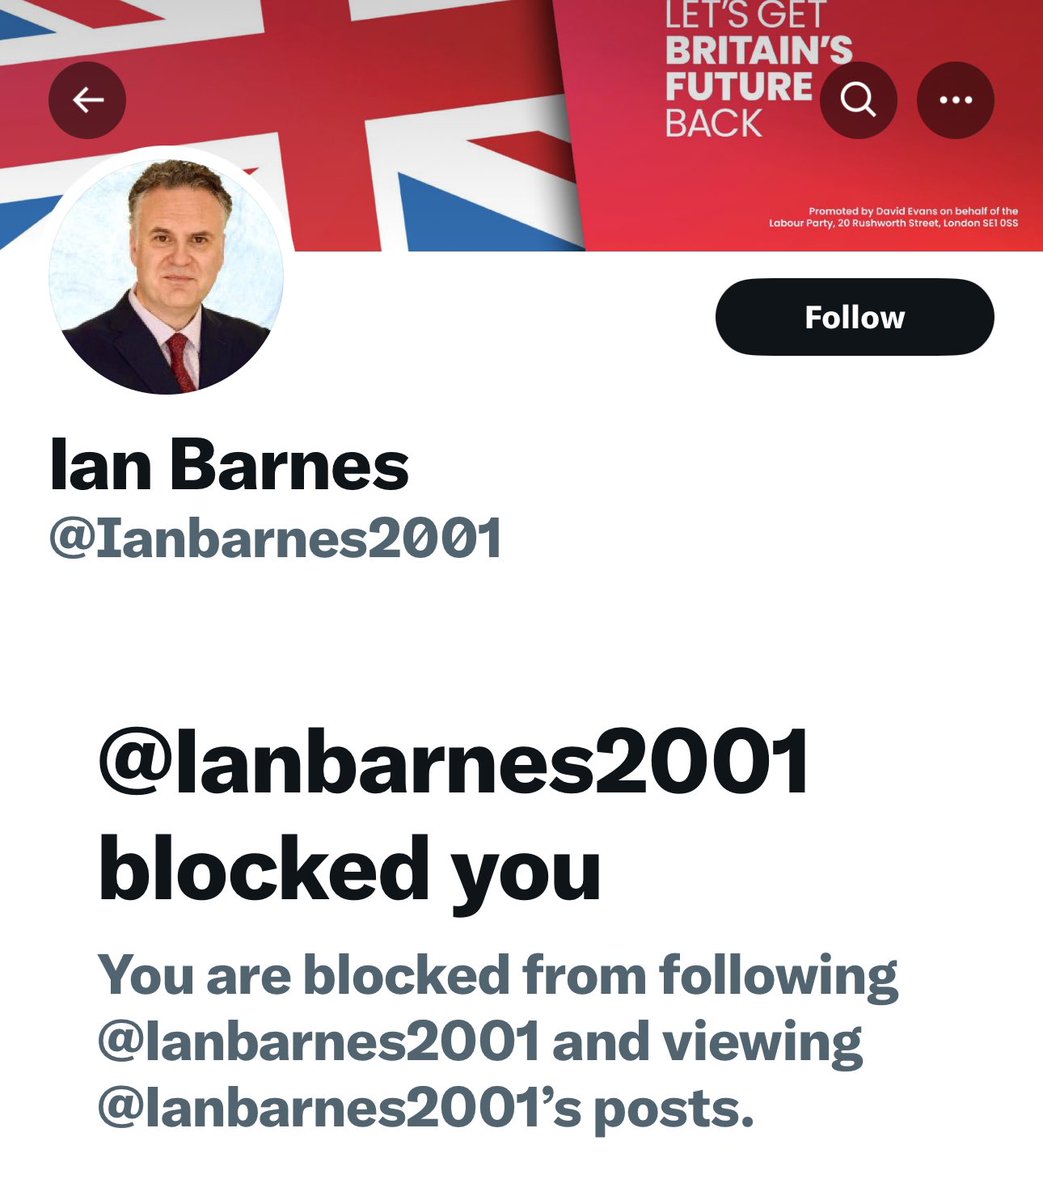 Barnes & I were Twitter buddies around social things, sustainability, LTNs, cycle lanes etc. And today I said I’m not sure about voting for Khan due to his views on Israel. Bang.